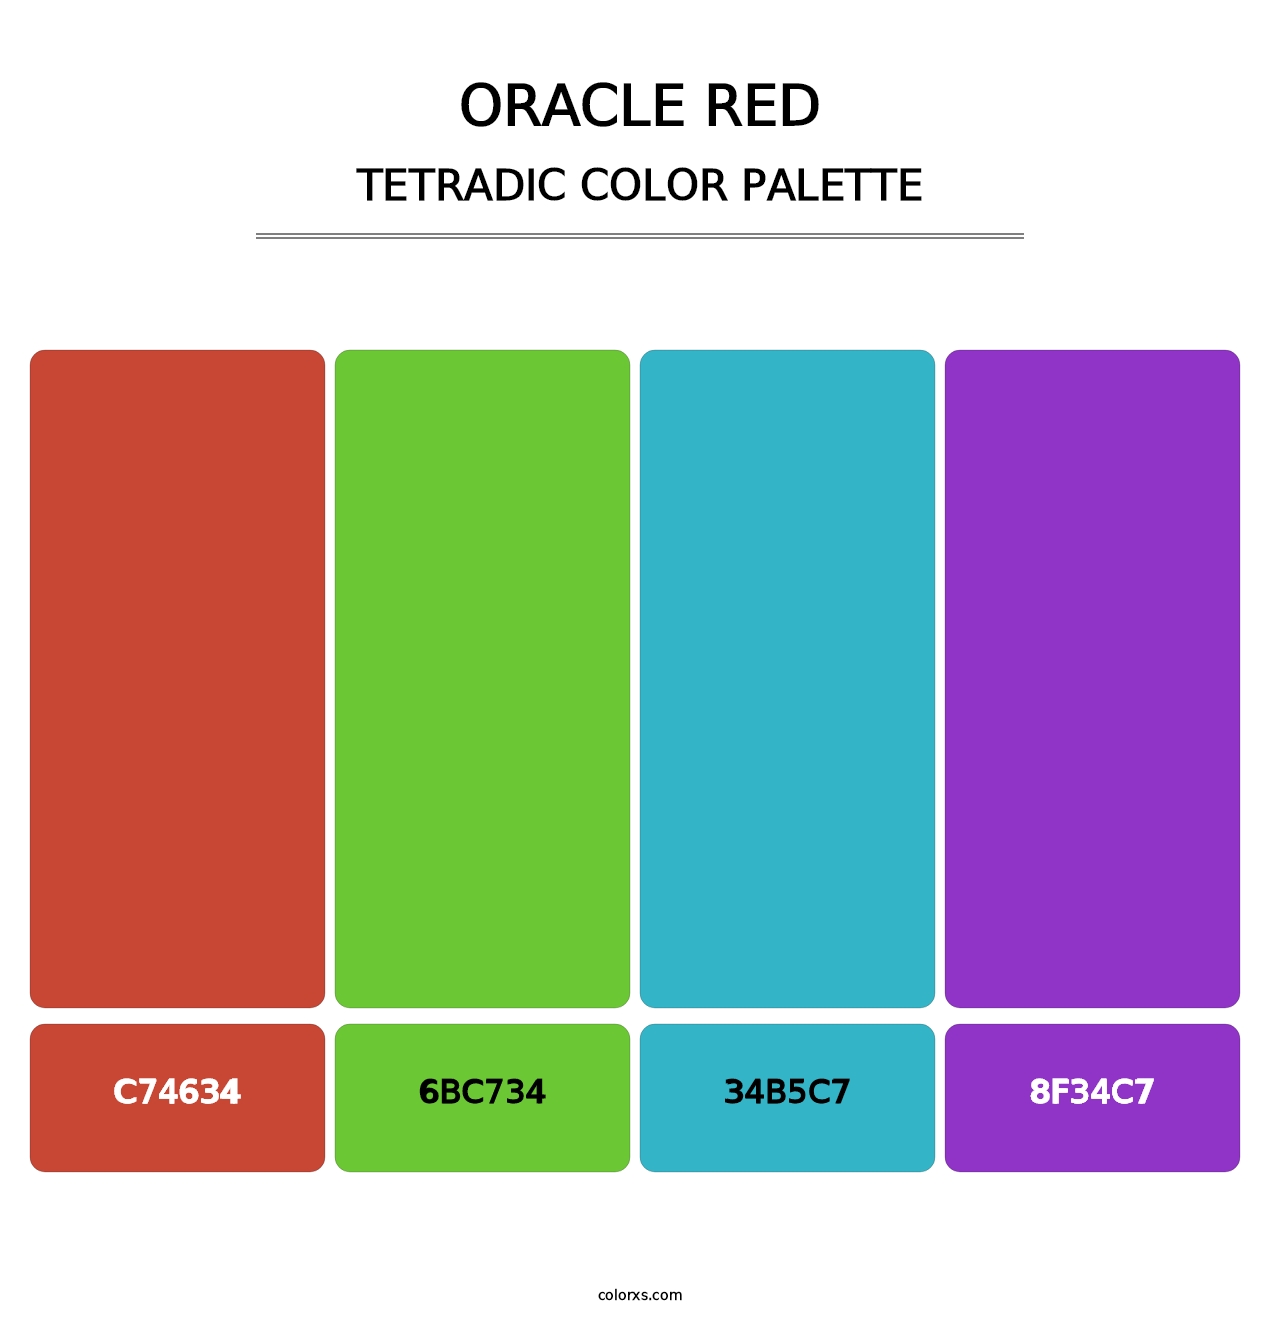 Oracle Red - Tetradic Color Palette